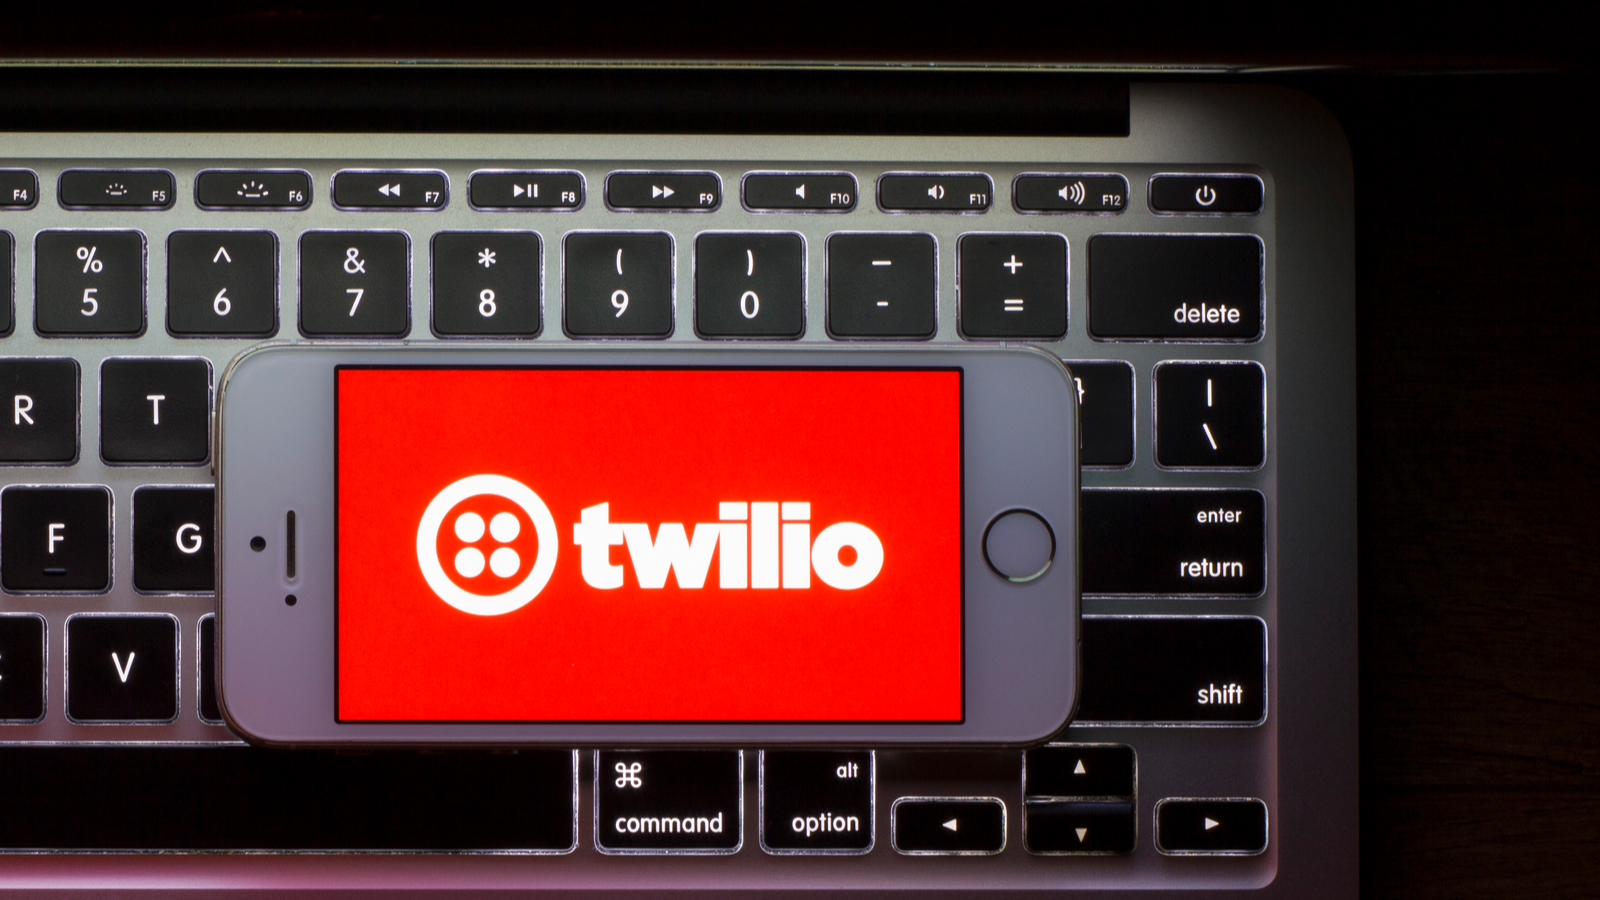 TWLO Stock. The Twilio logo is seen on a smartphone. Twilio is a cloud communications platform as a service company based in San Francisco, California. TWLO stock.